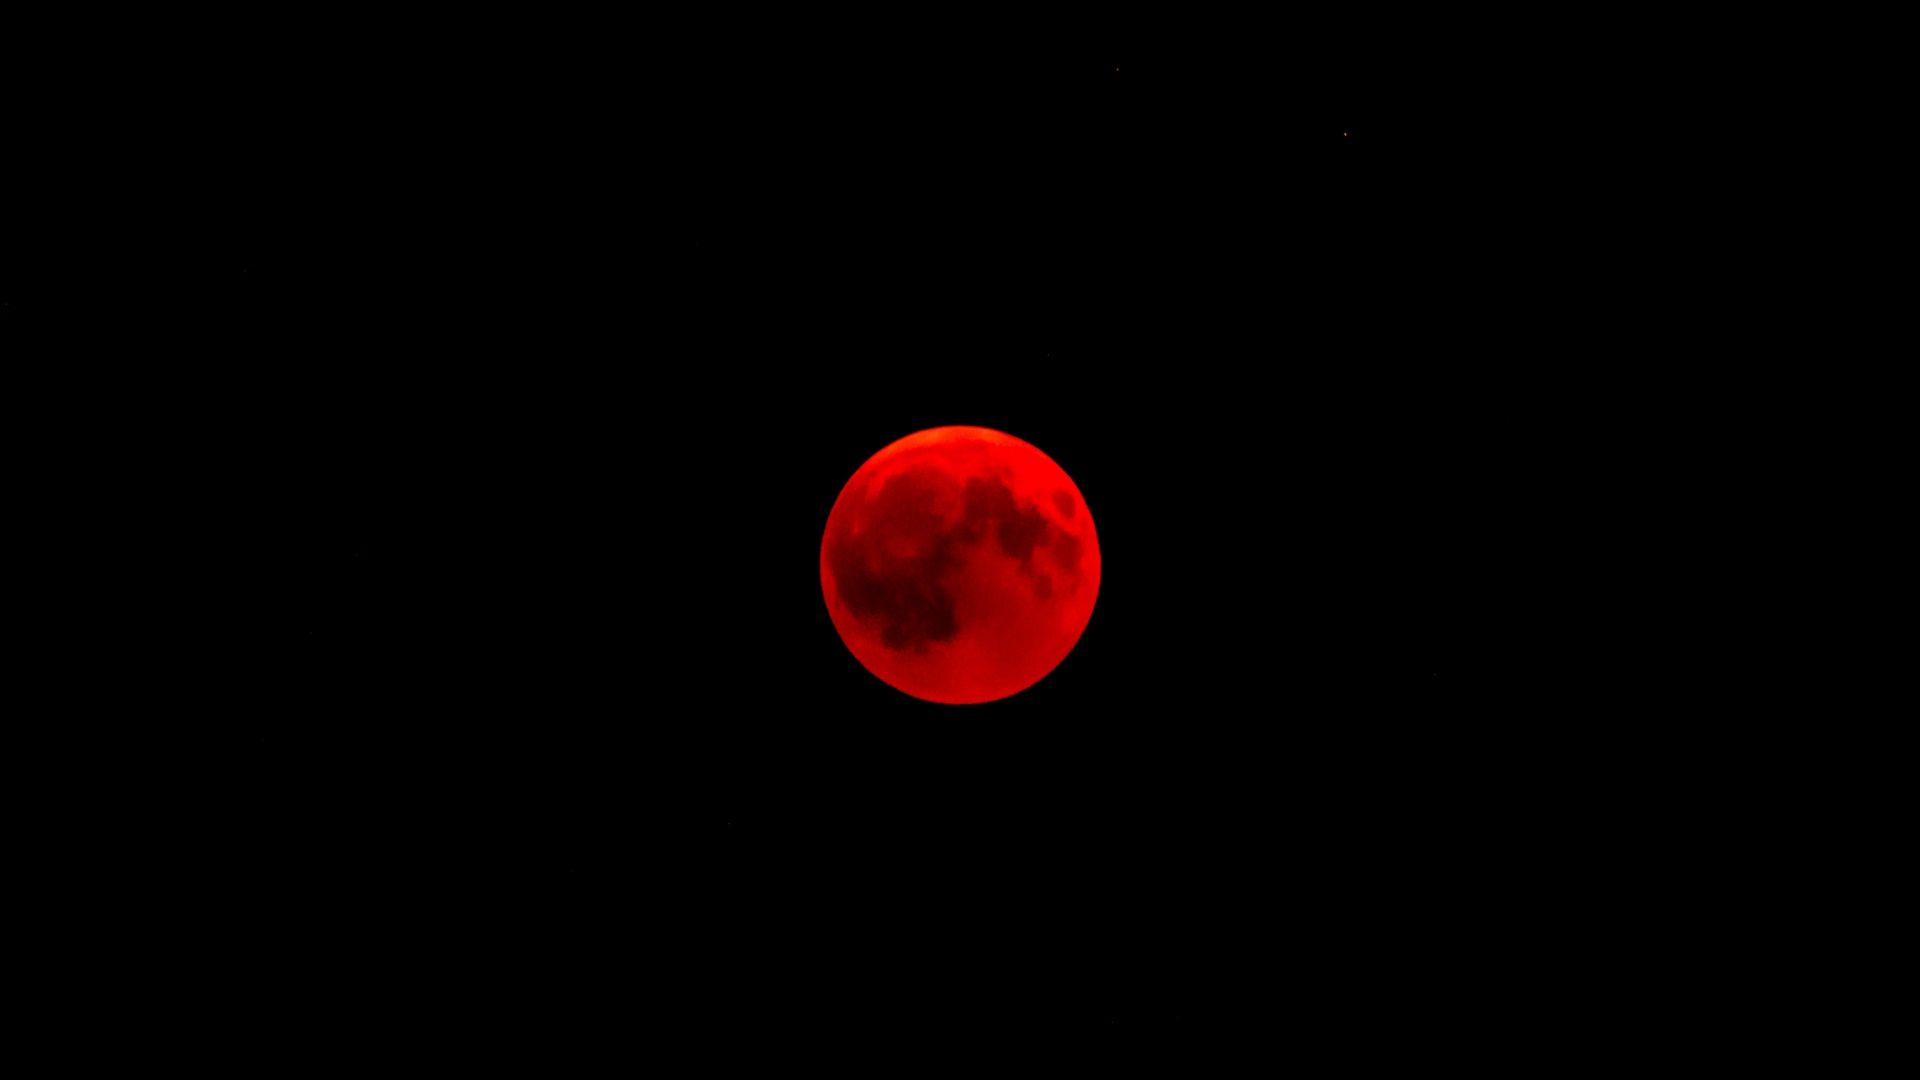 Wallpaper red moon moon full moon eclipse red and black wallpaper red moon dark red wallpaper